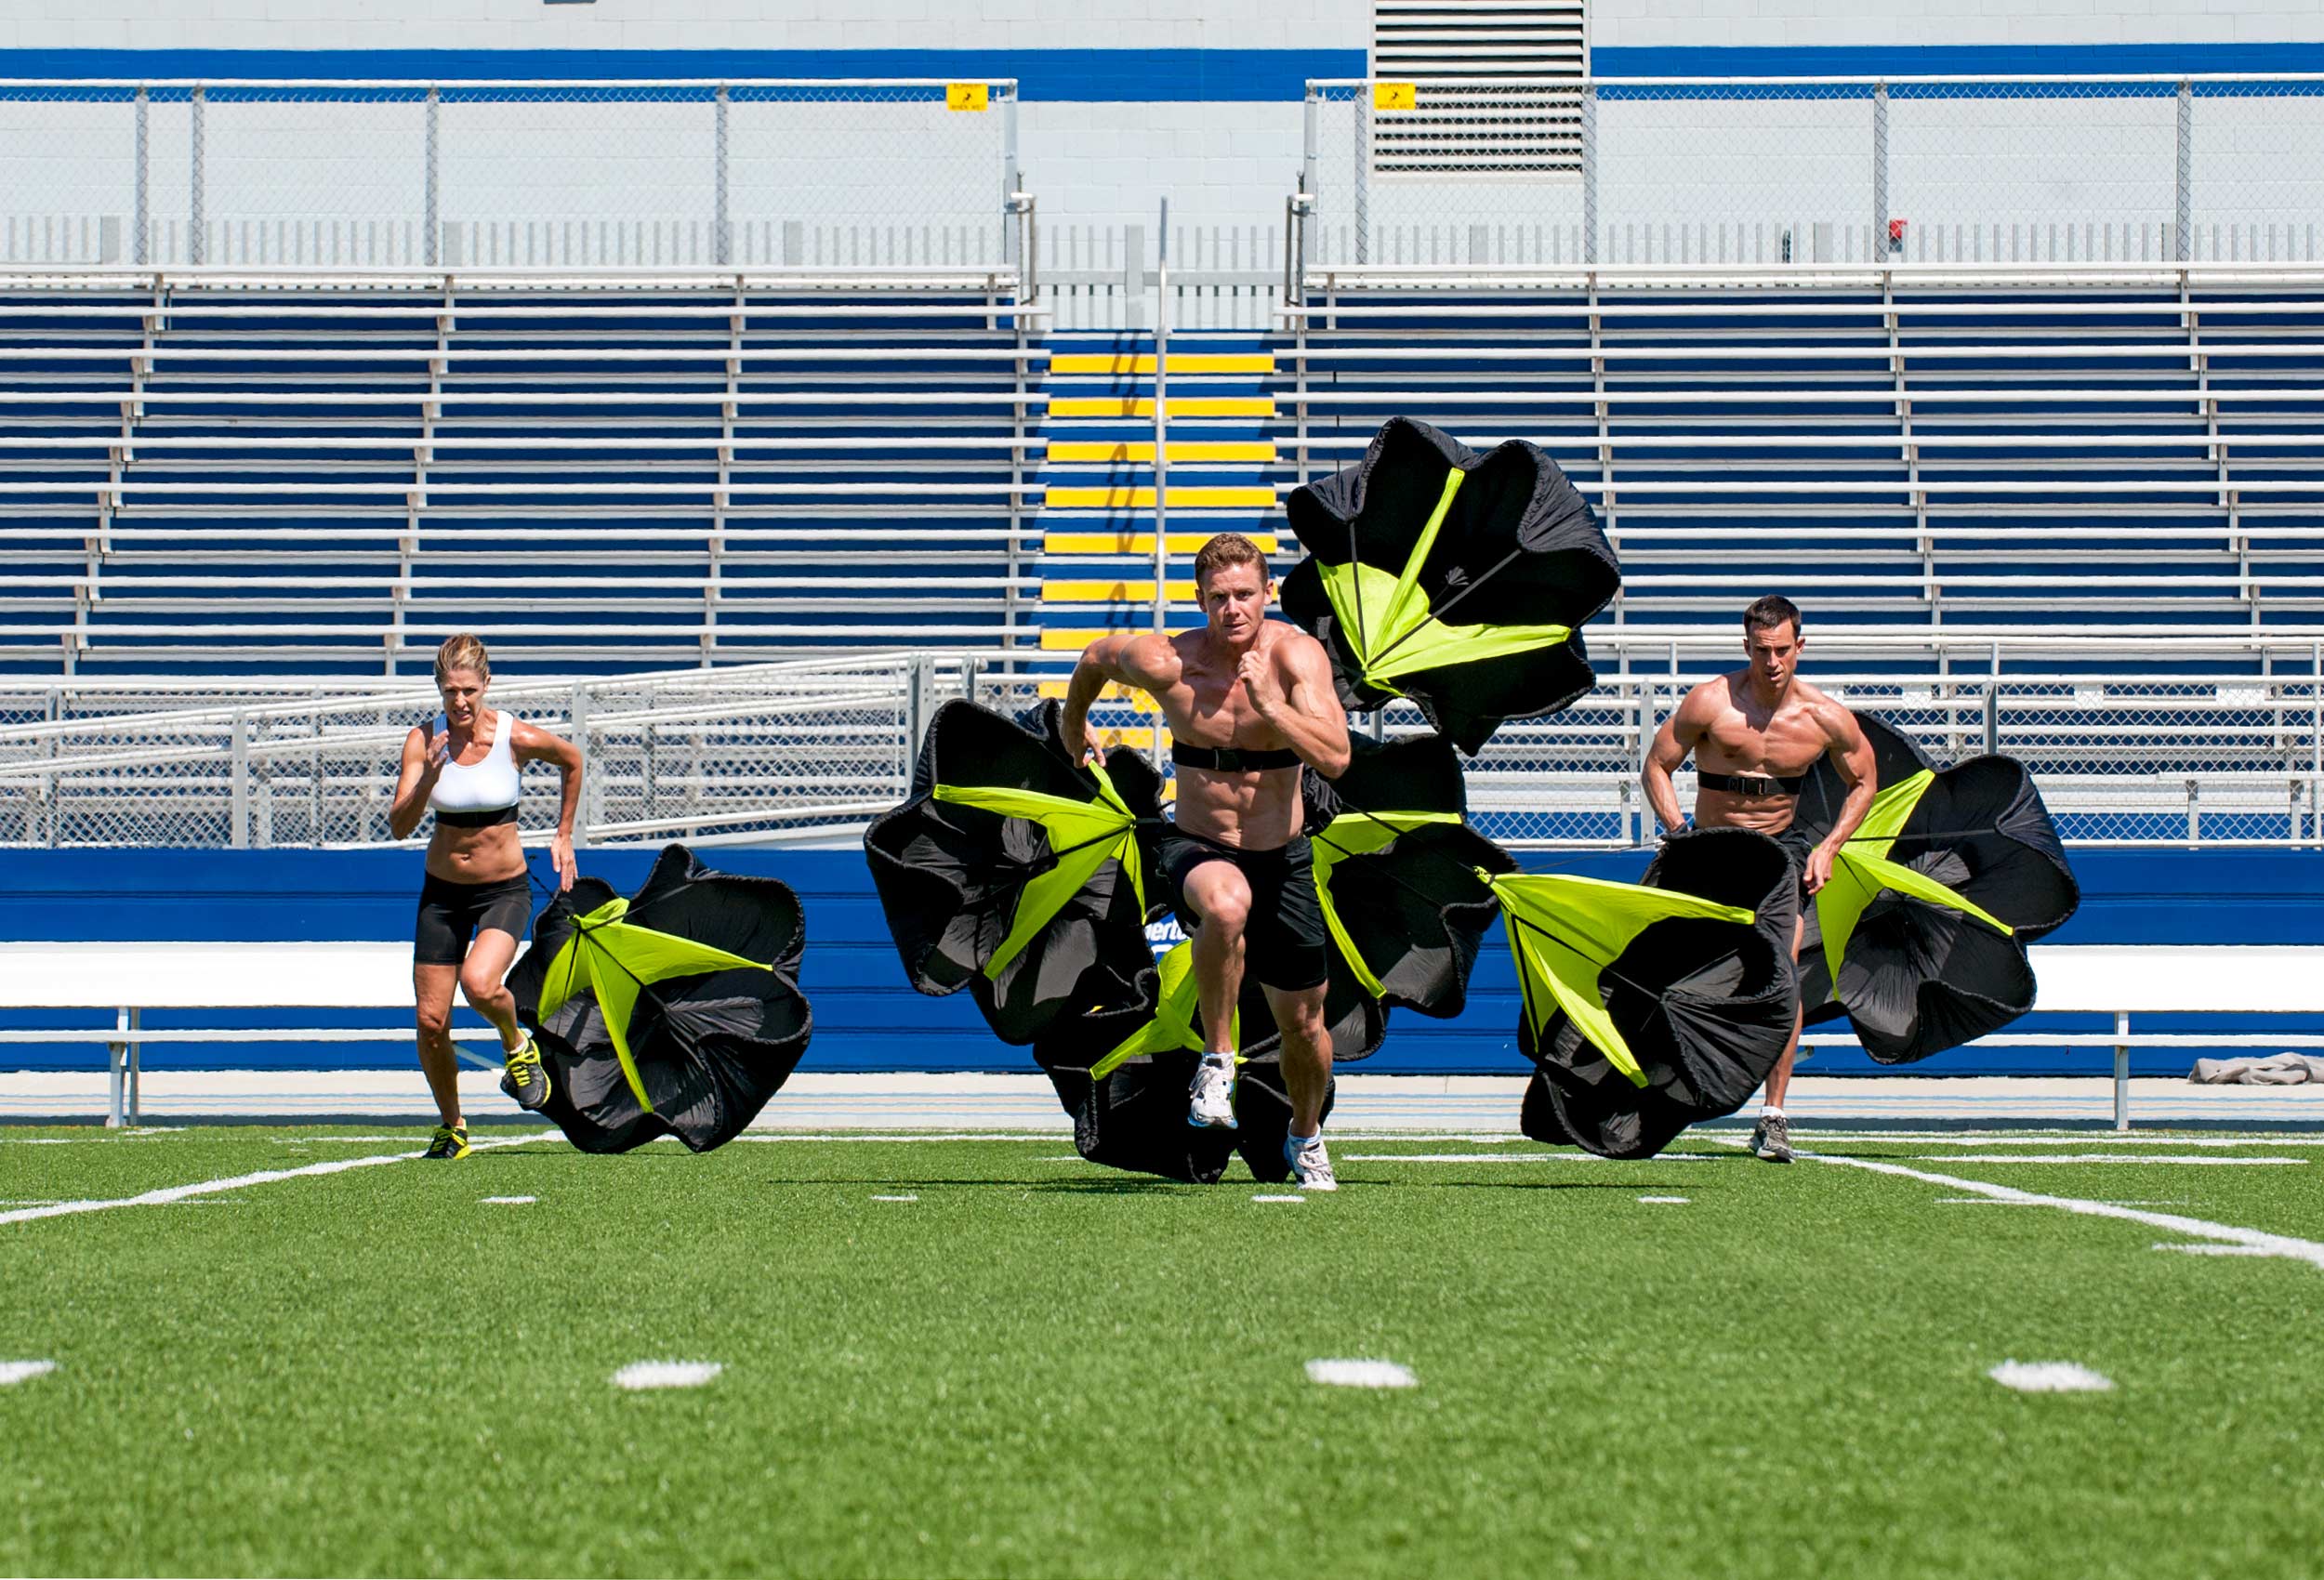 Coppertone Sport Pro athletes run across football field with speed resistant parachutes 